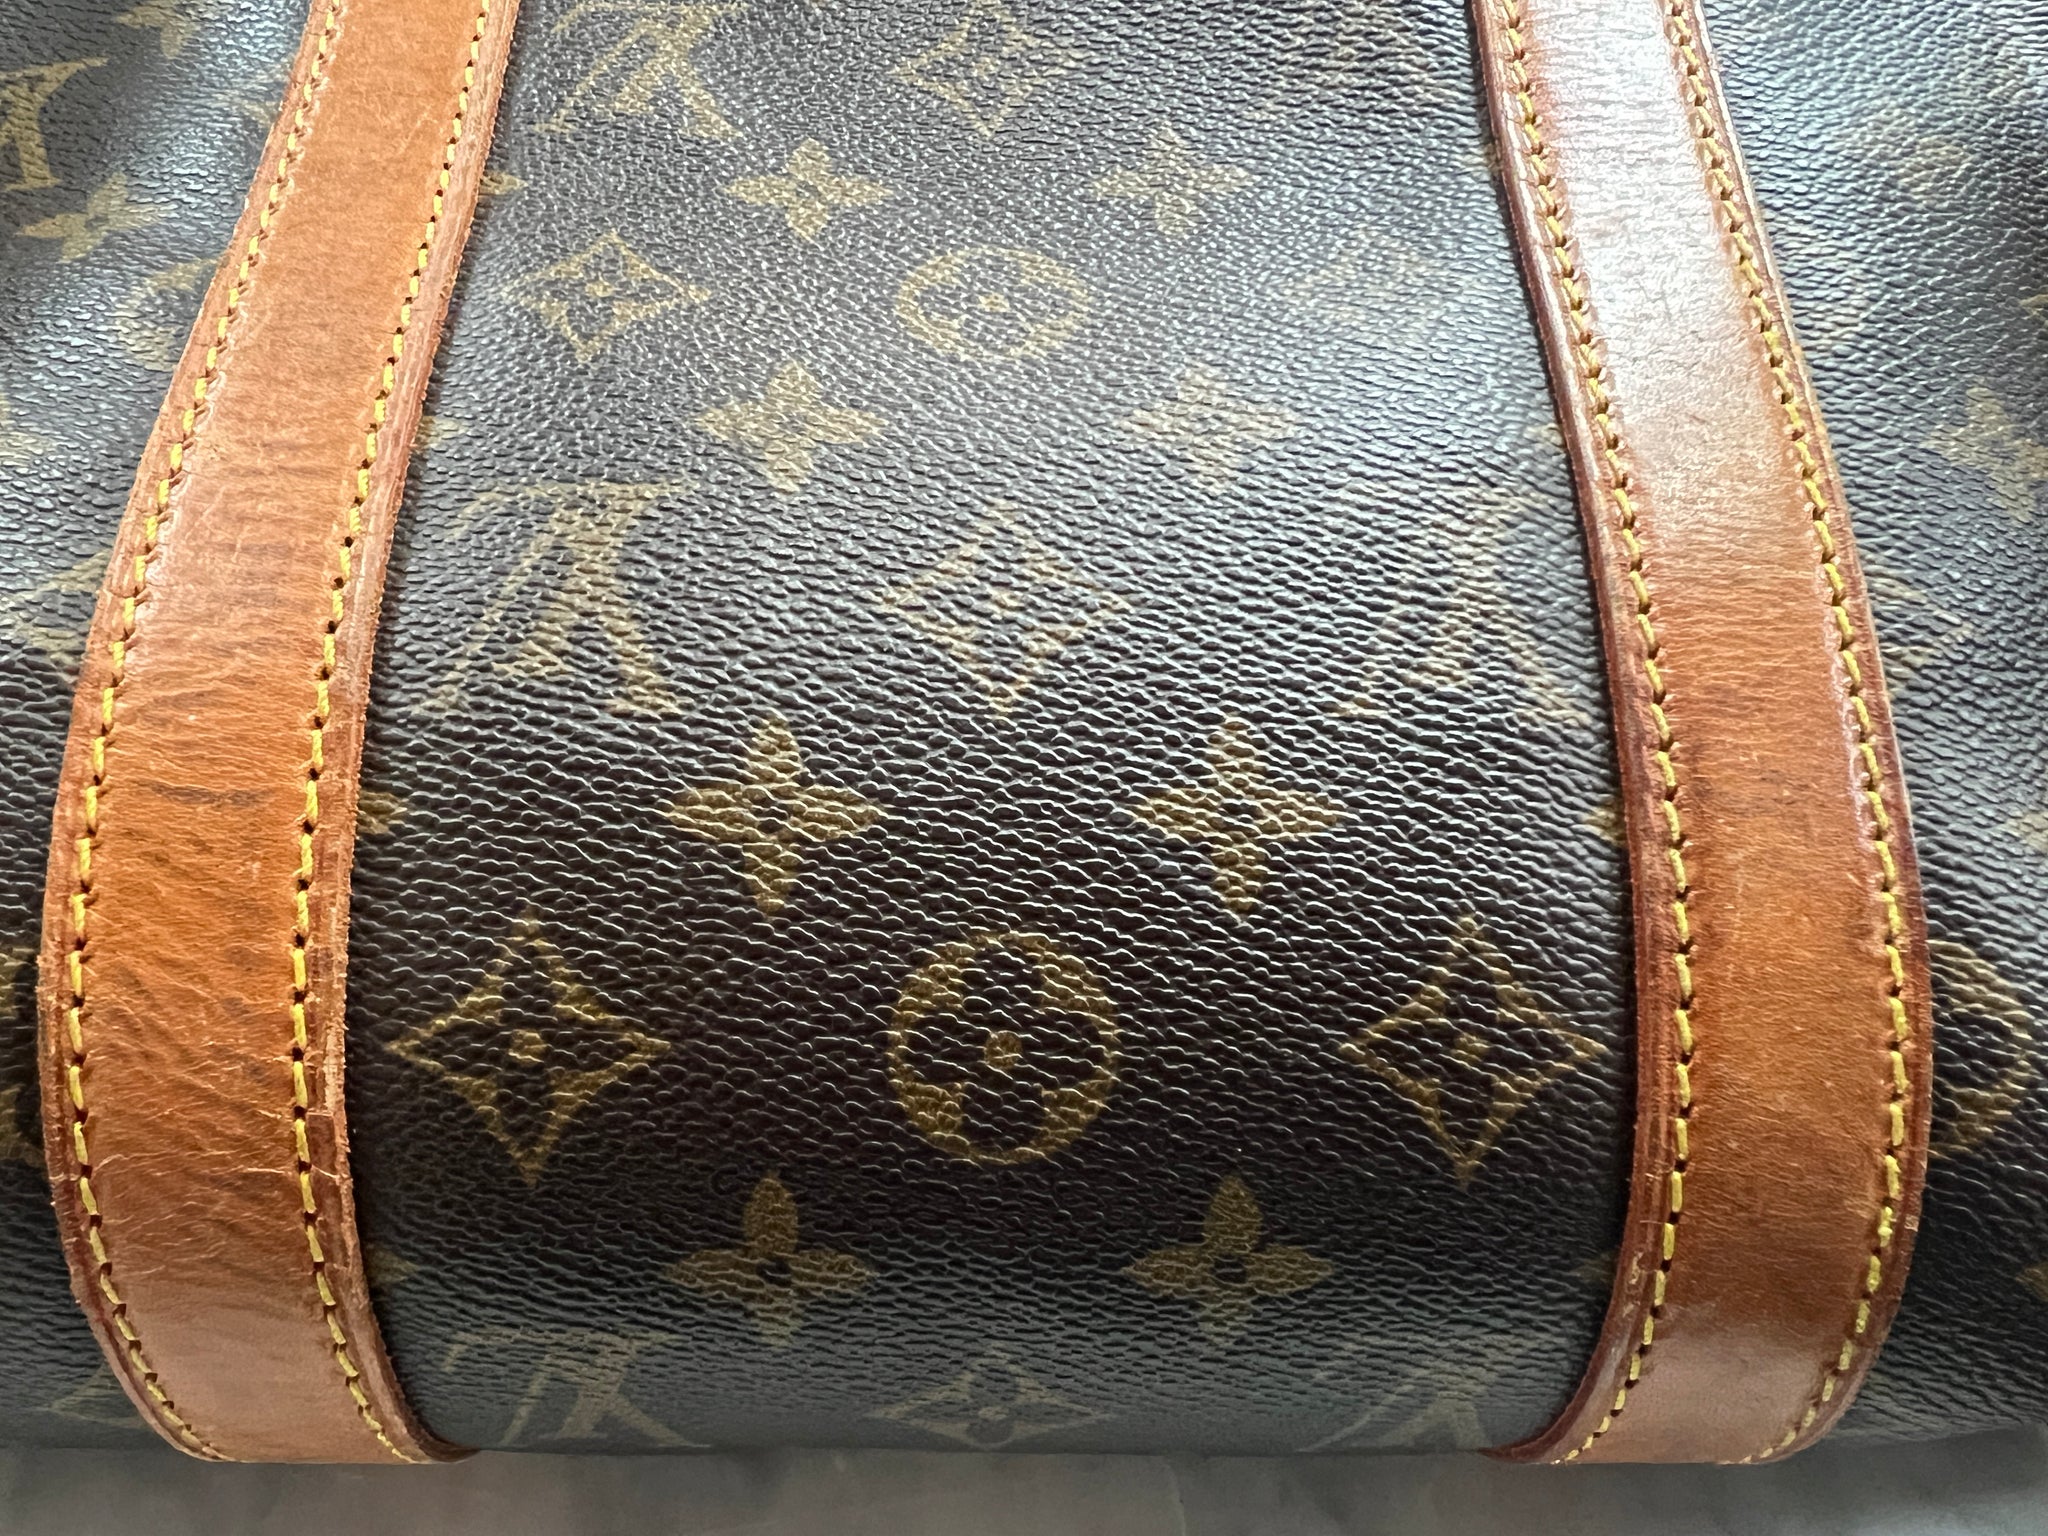 What size is your KEEPALL? 45/50/55? What's the material? Is it a